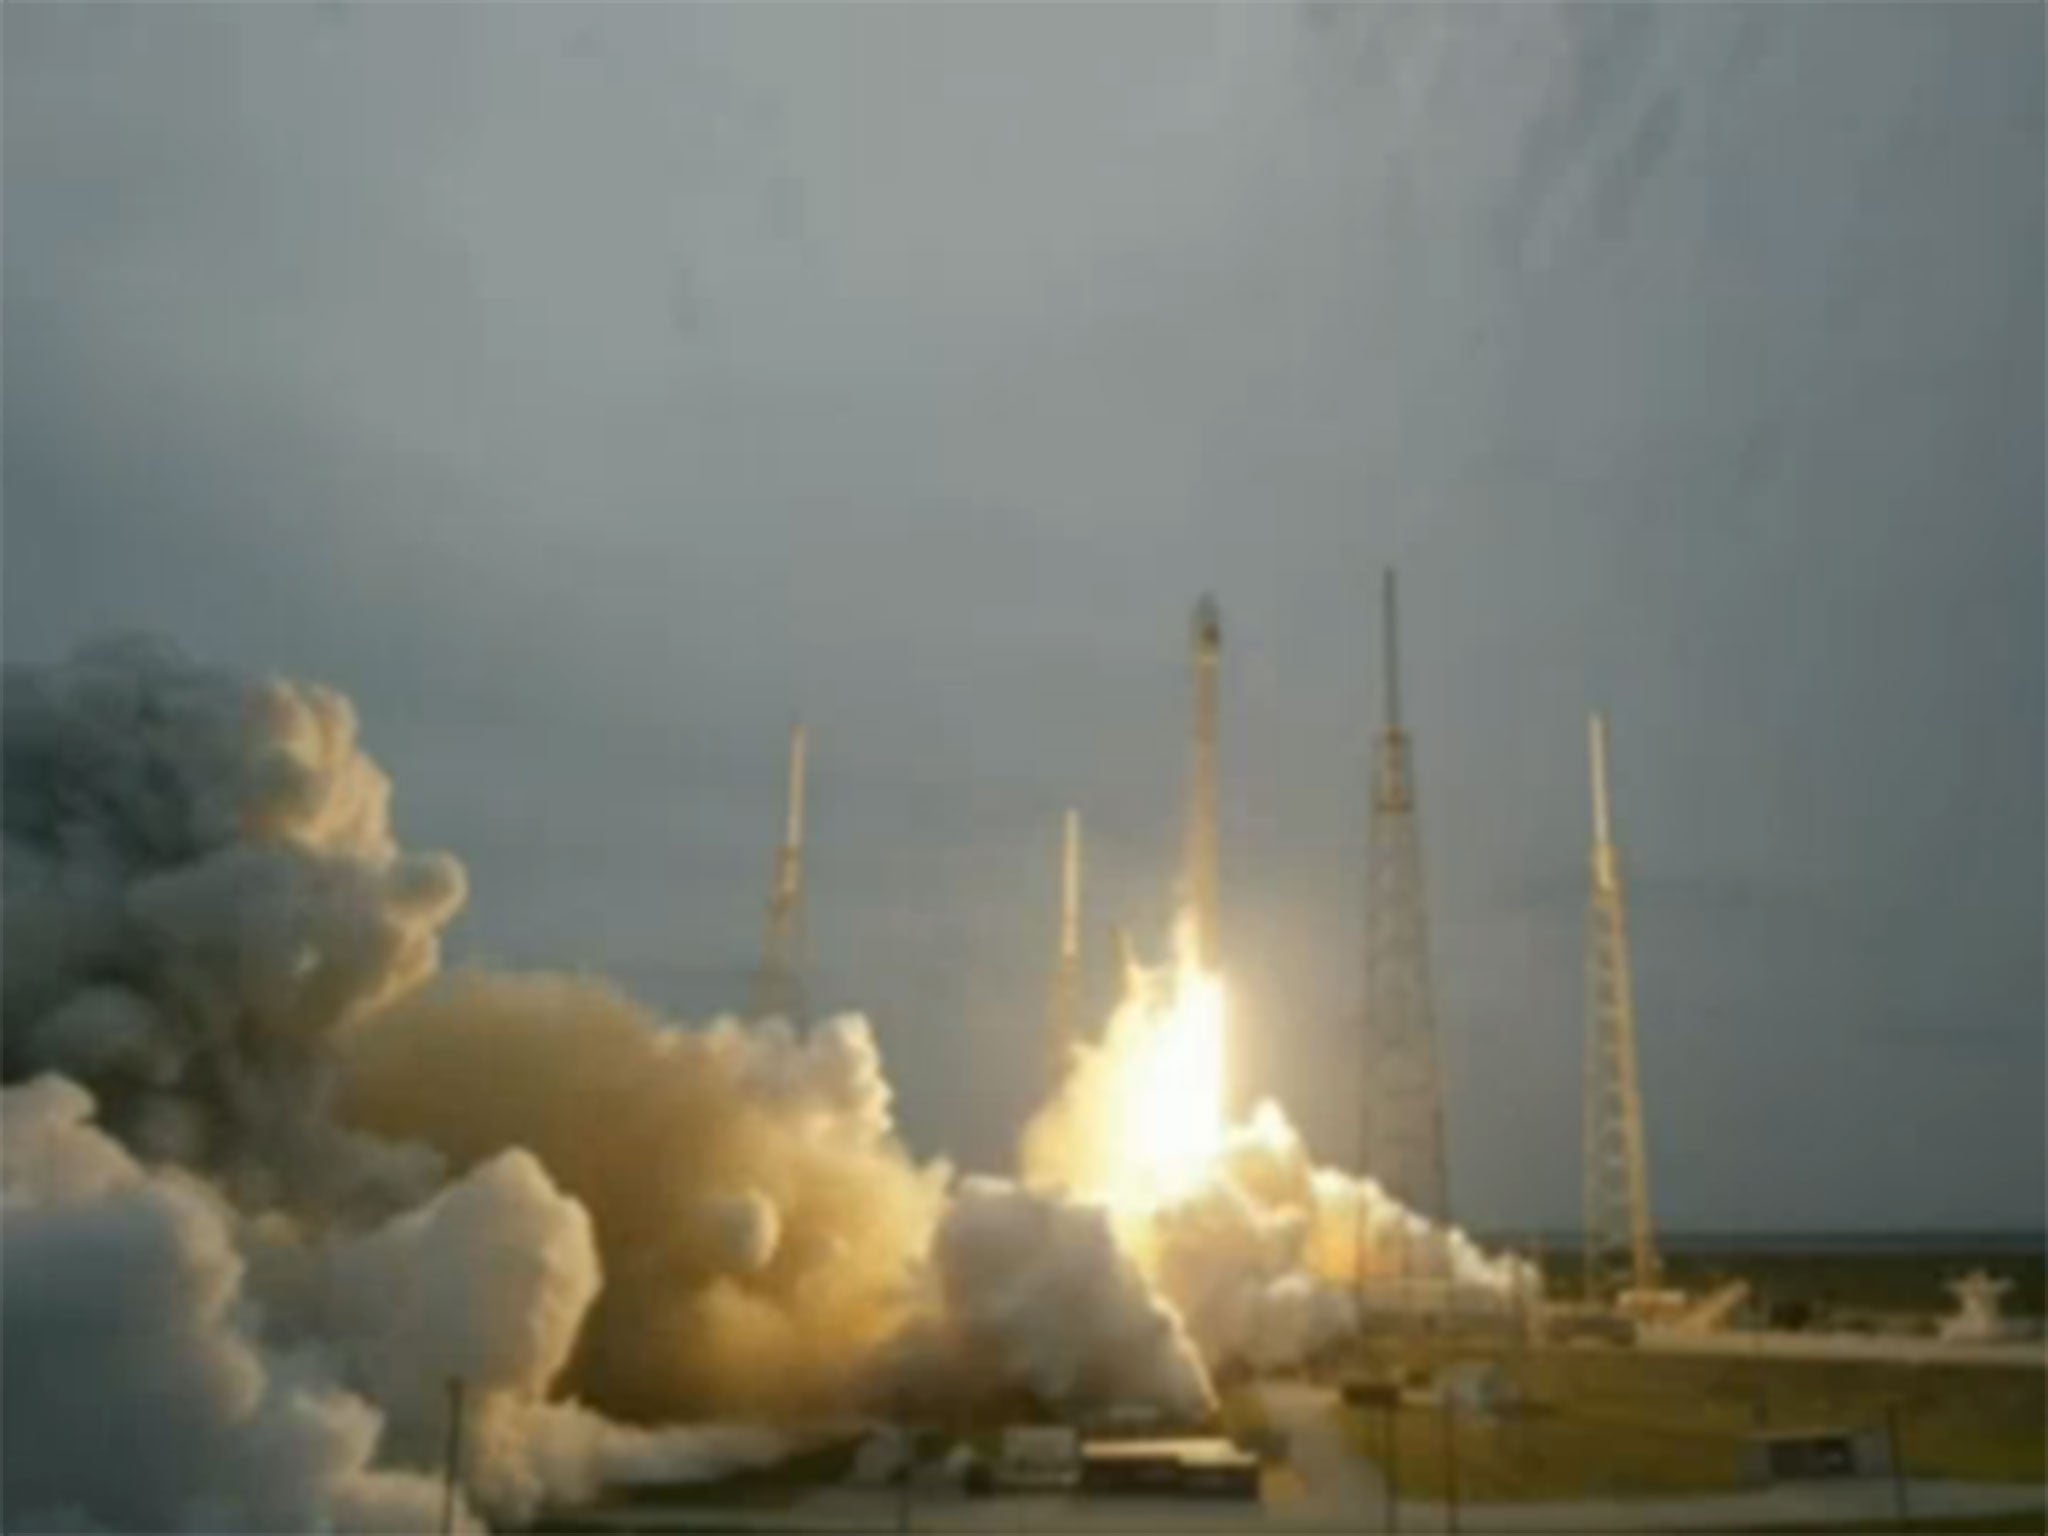 The SpaceX Falcon 9 rocket successfully launched on Monday